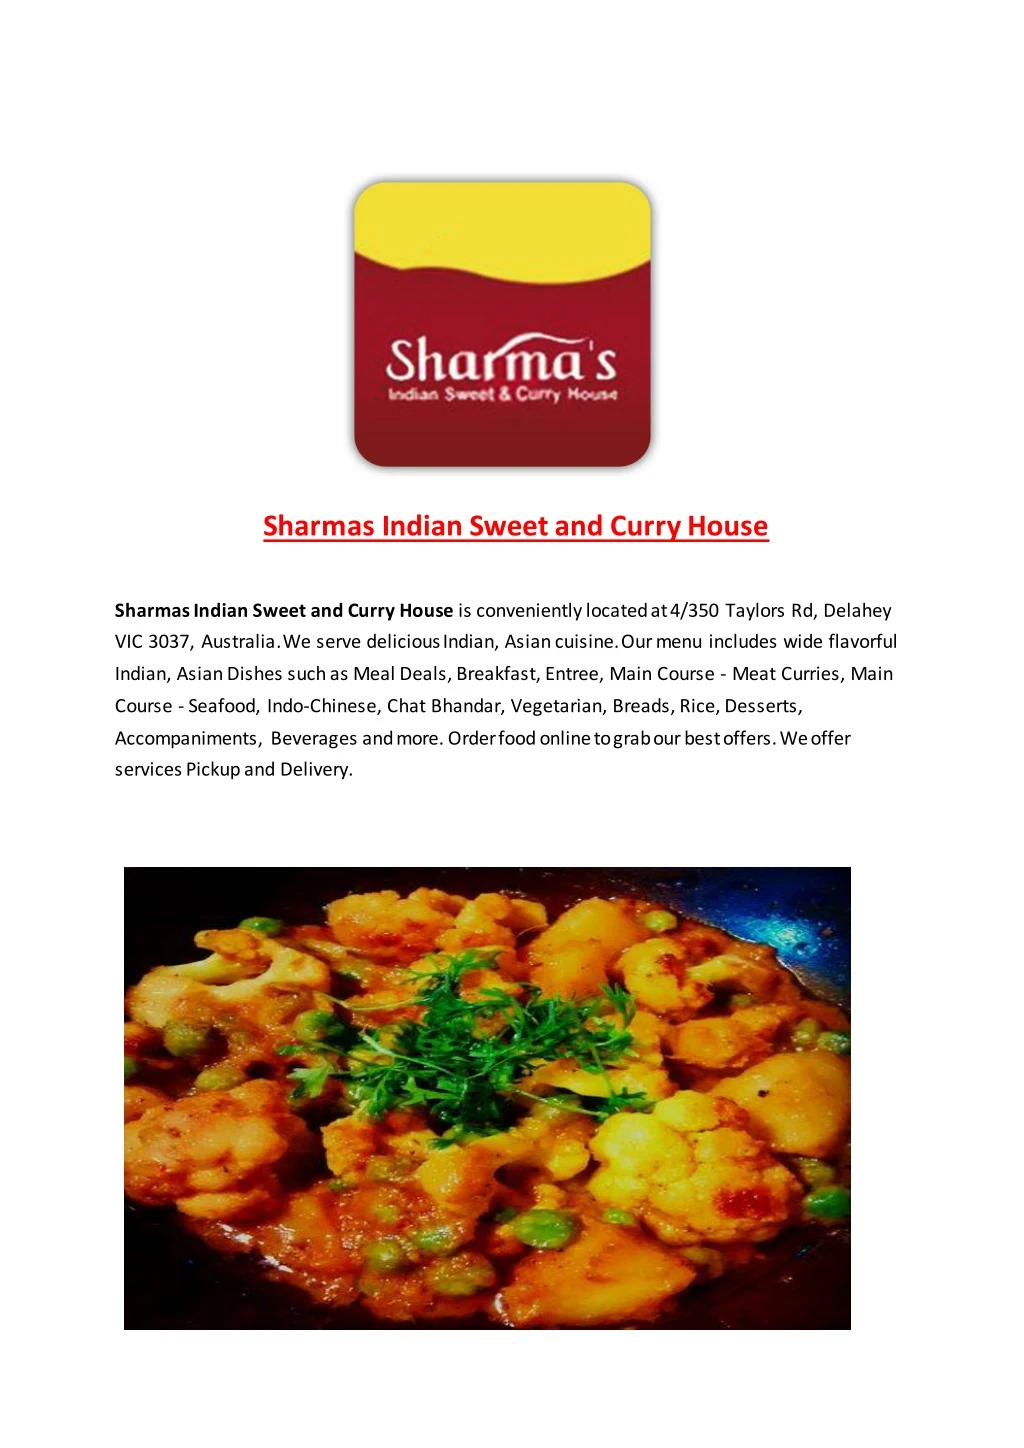 sharmas indian sweet and curry house